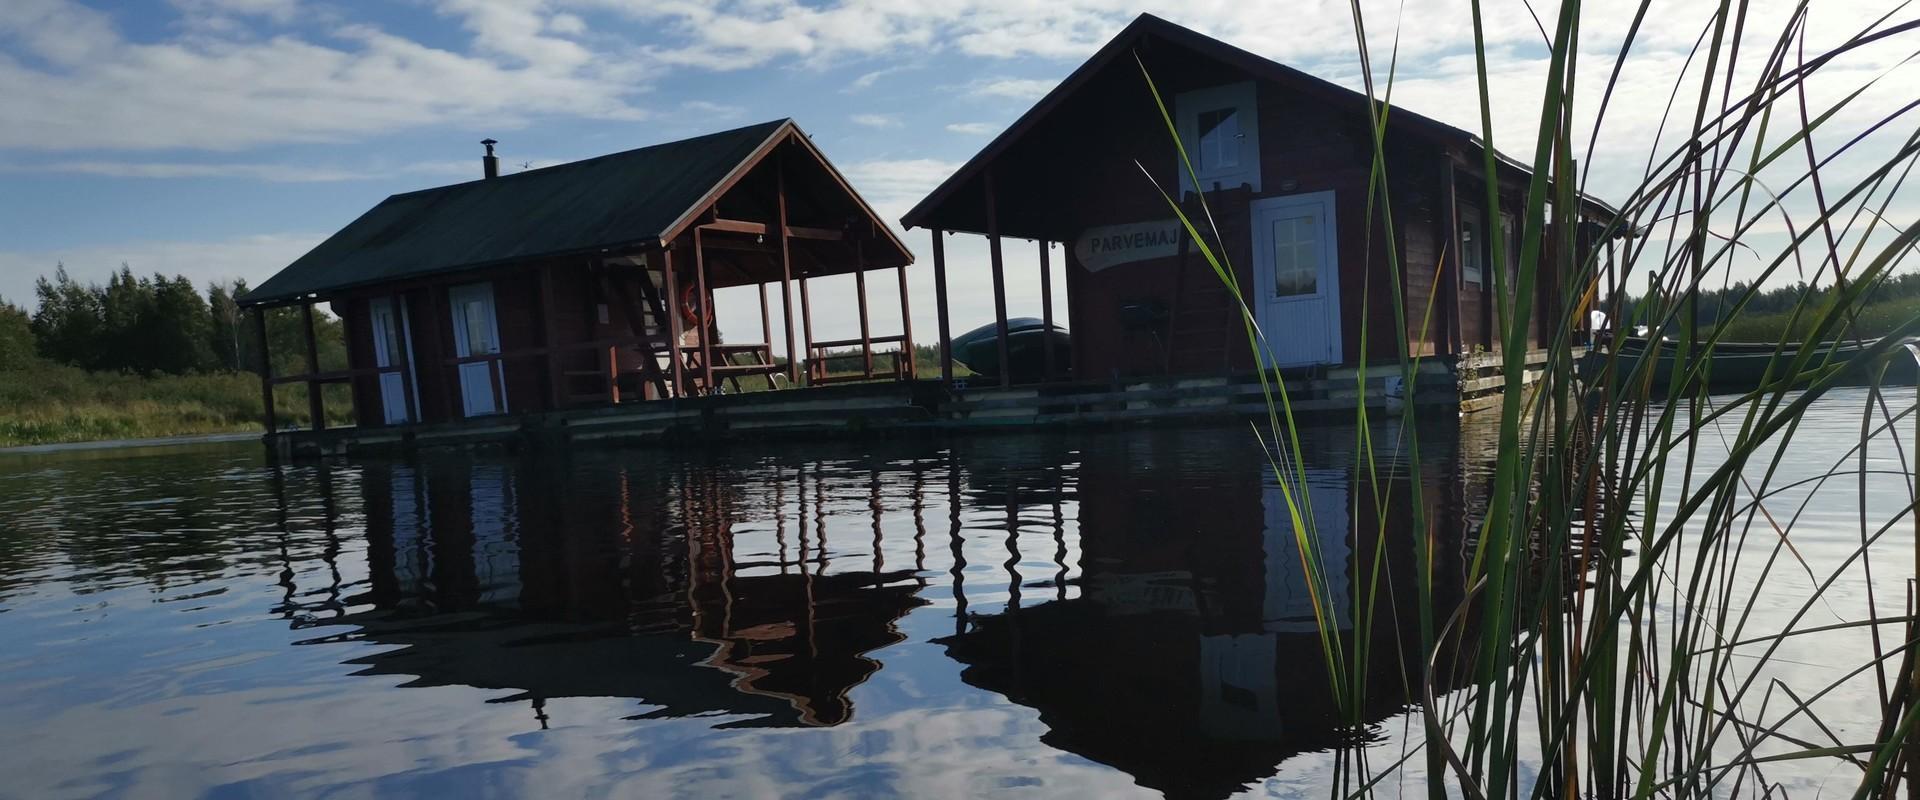 A unique floating house in the middle of the Kalli River is waiting for you – away from civilization and only accessible by water! The floating house 